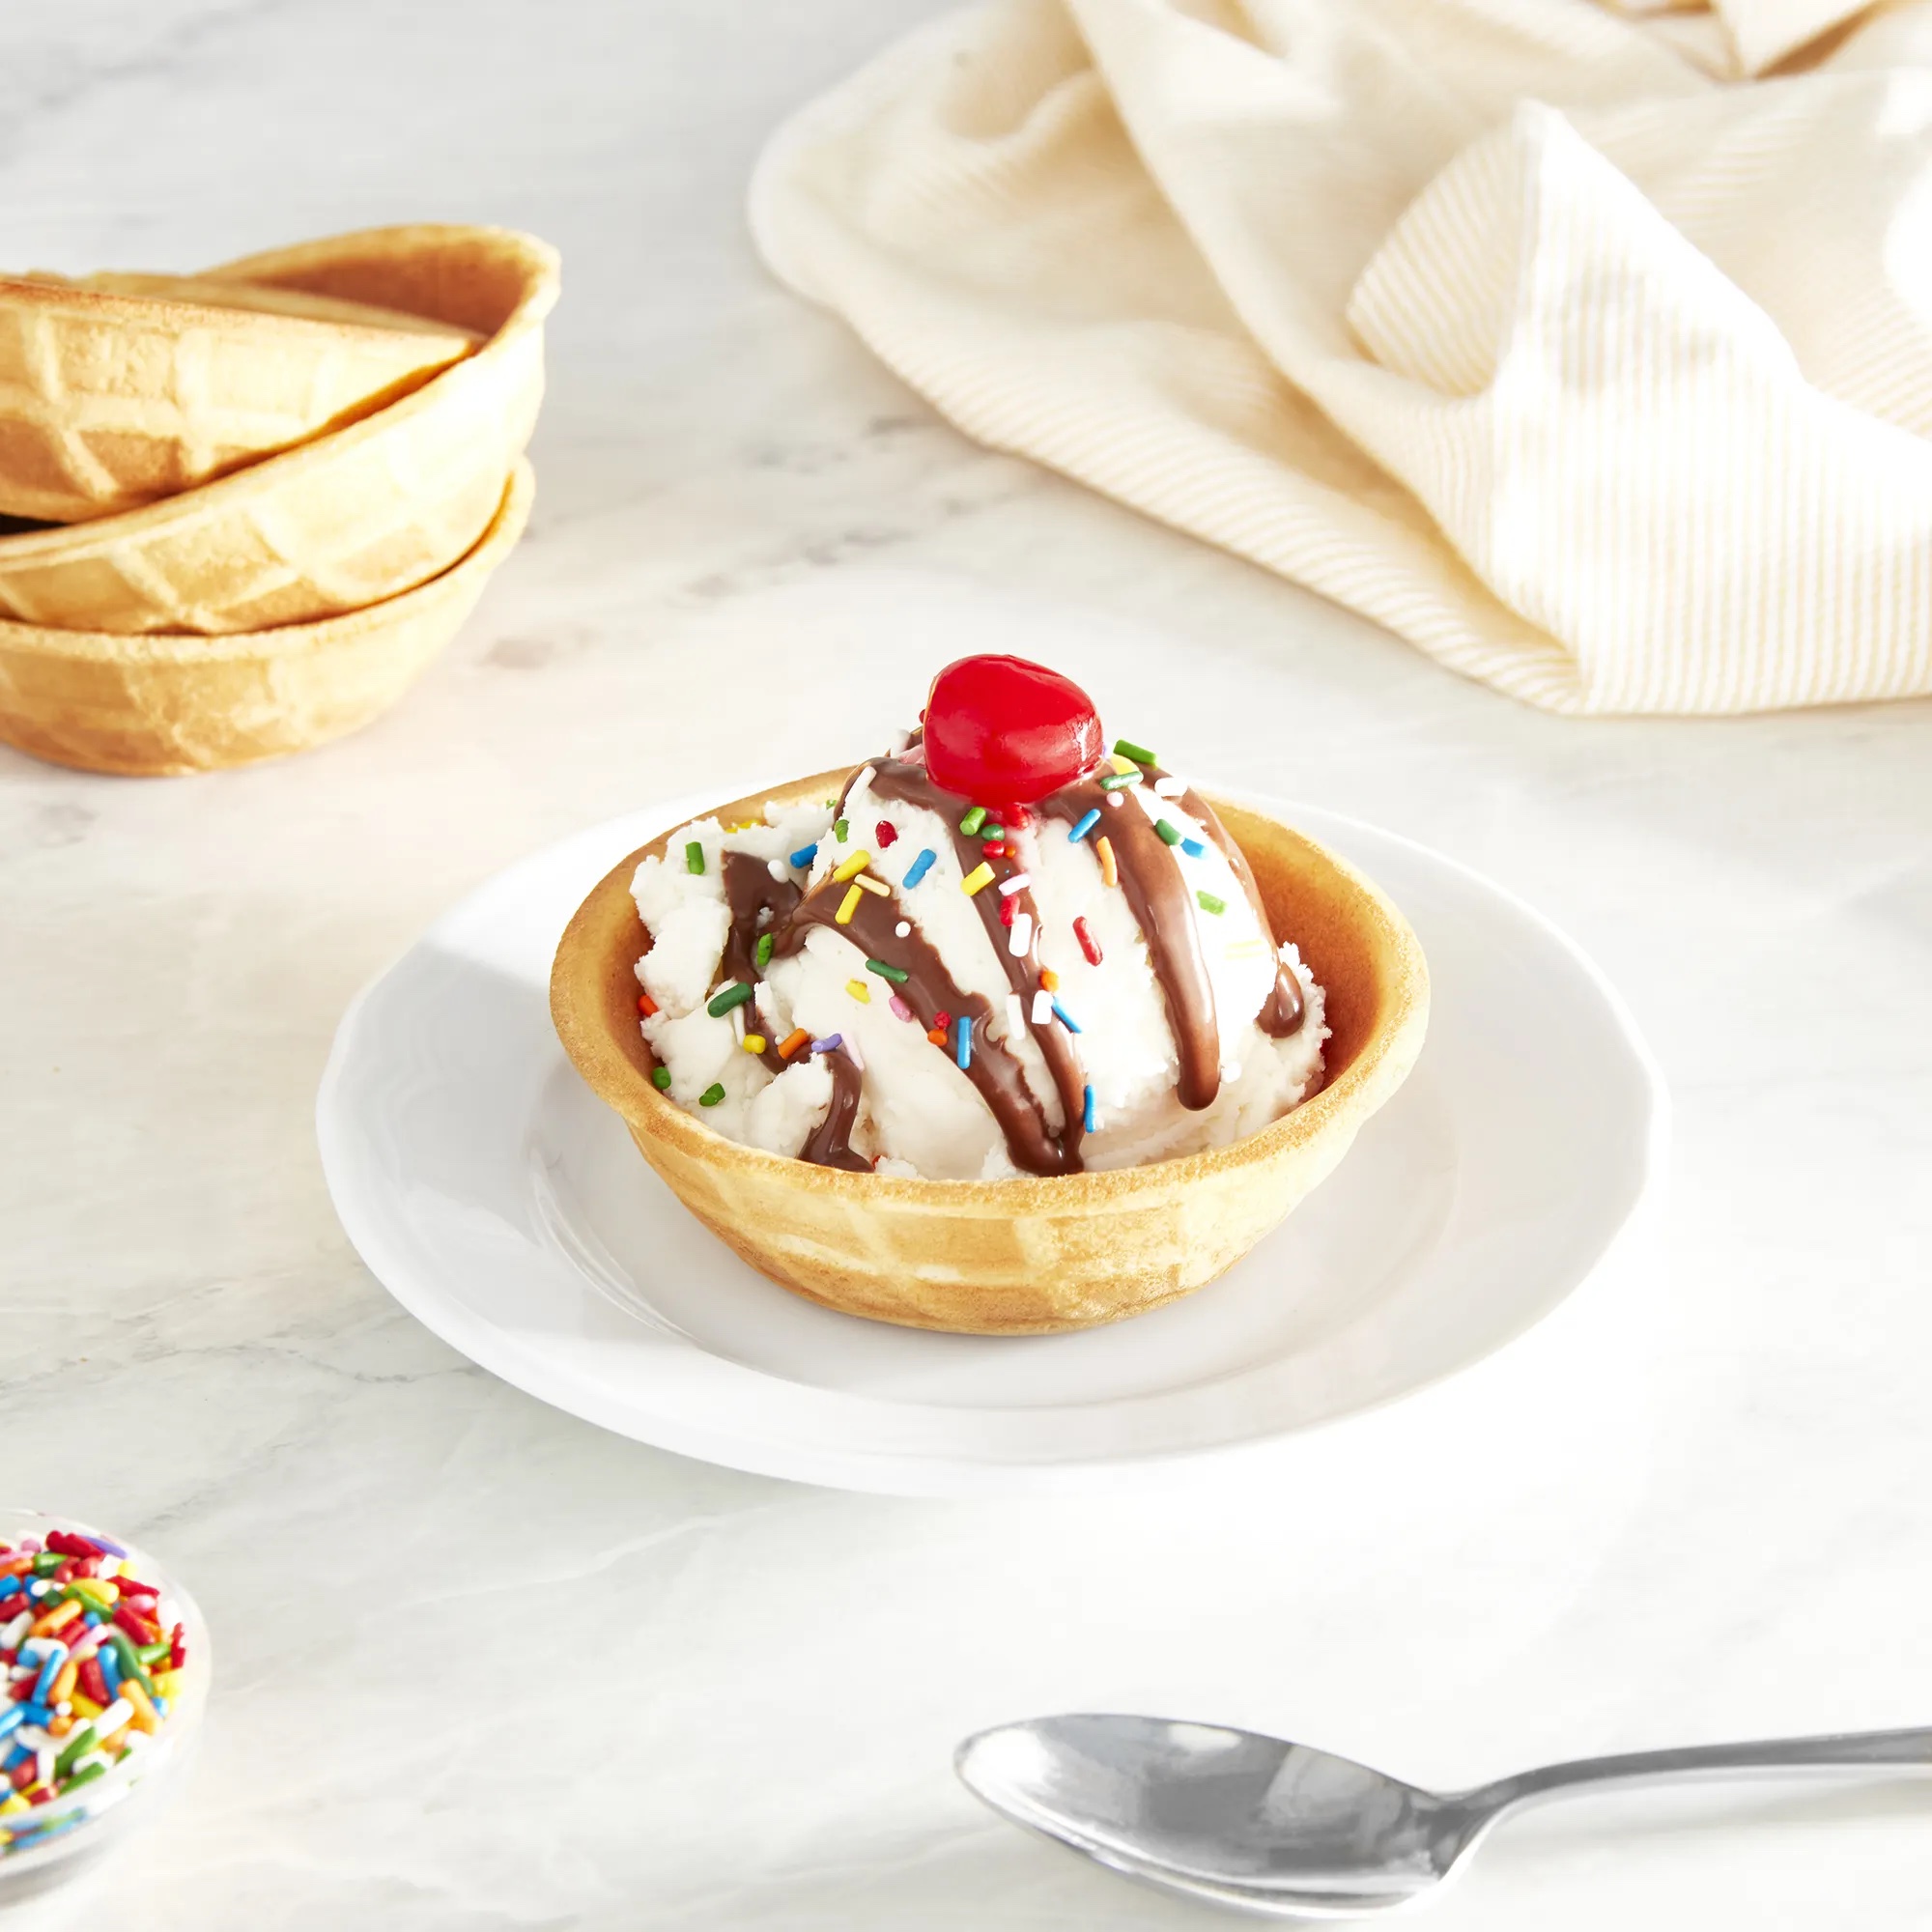 Waffle Bowl Maker, Just what I need to take my ice cream sundae party to  the next level!!  (affiliate), By cookies and cups